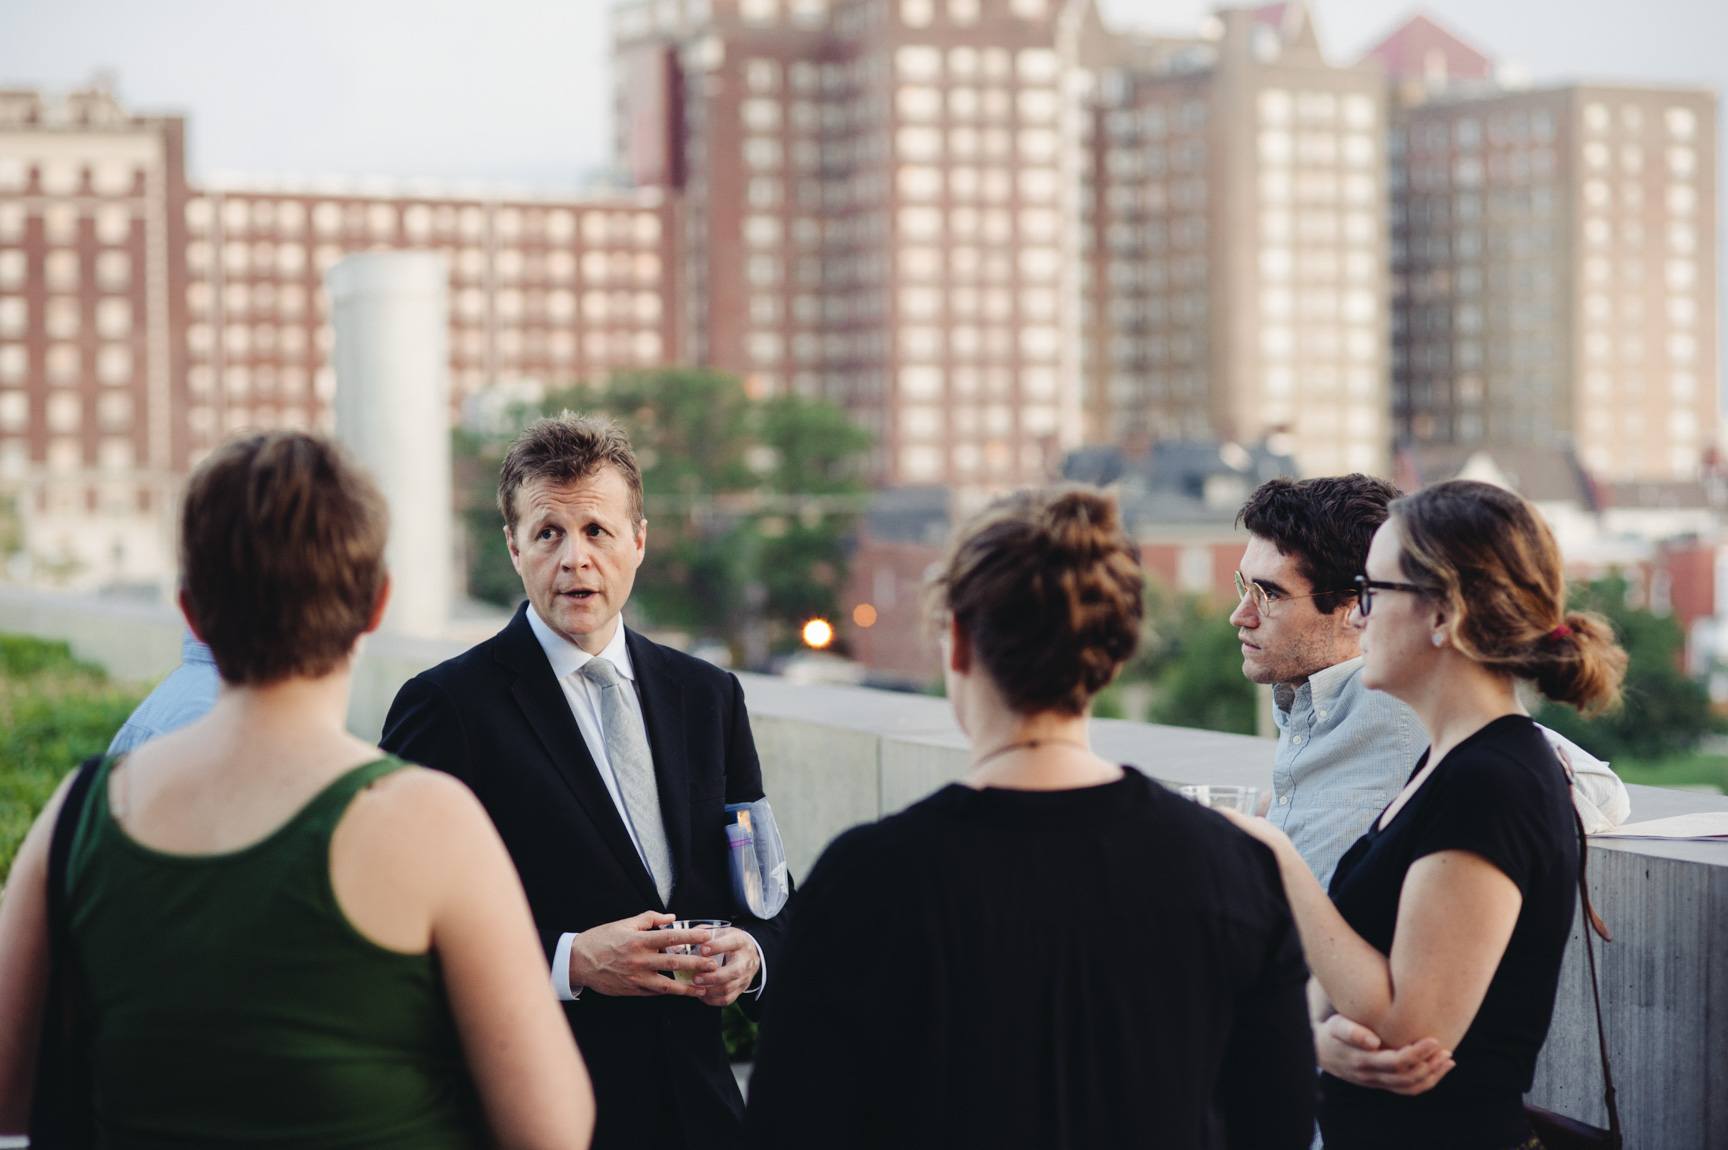 Christian Bök speaks with visitors on the Mezzanine patio.